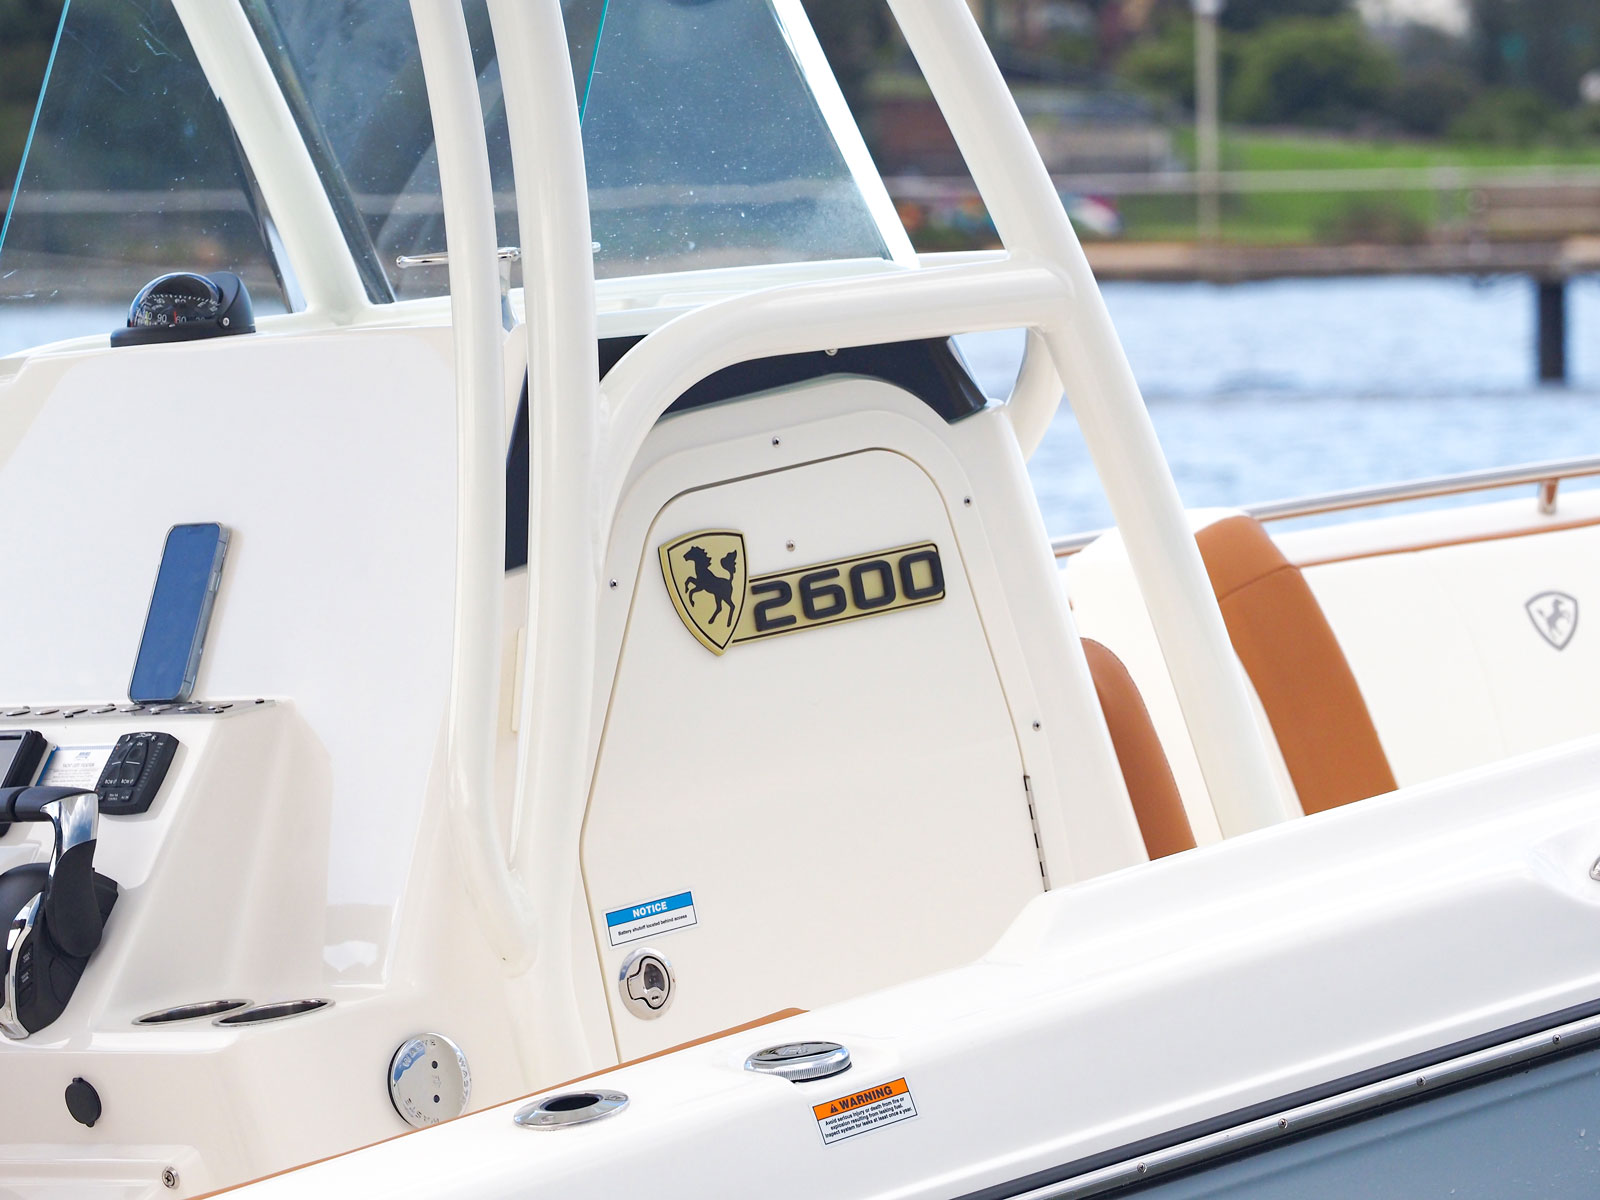 Review: Century Boats 2600 Centre Console, TradeABoat